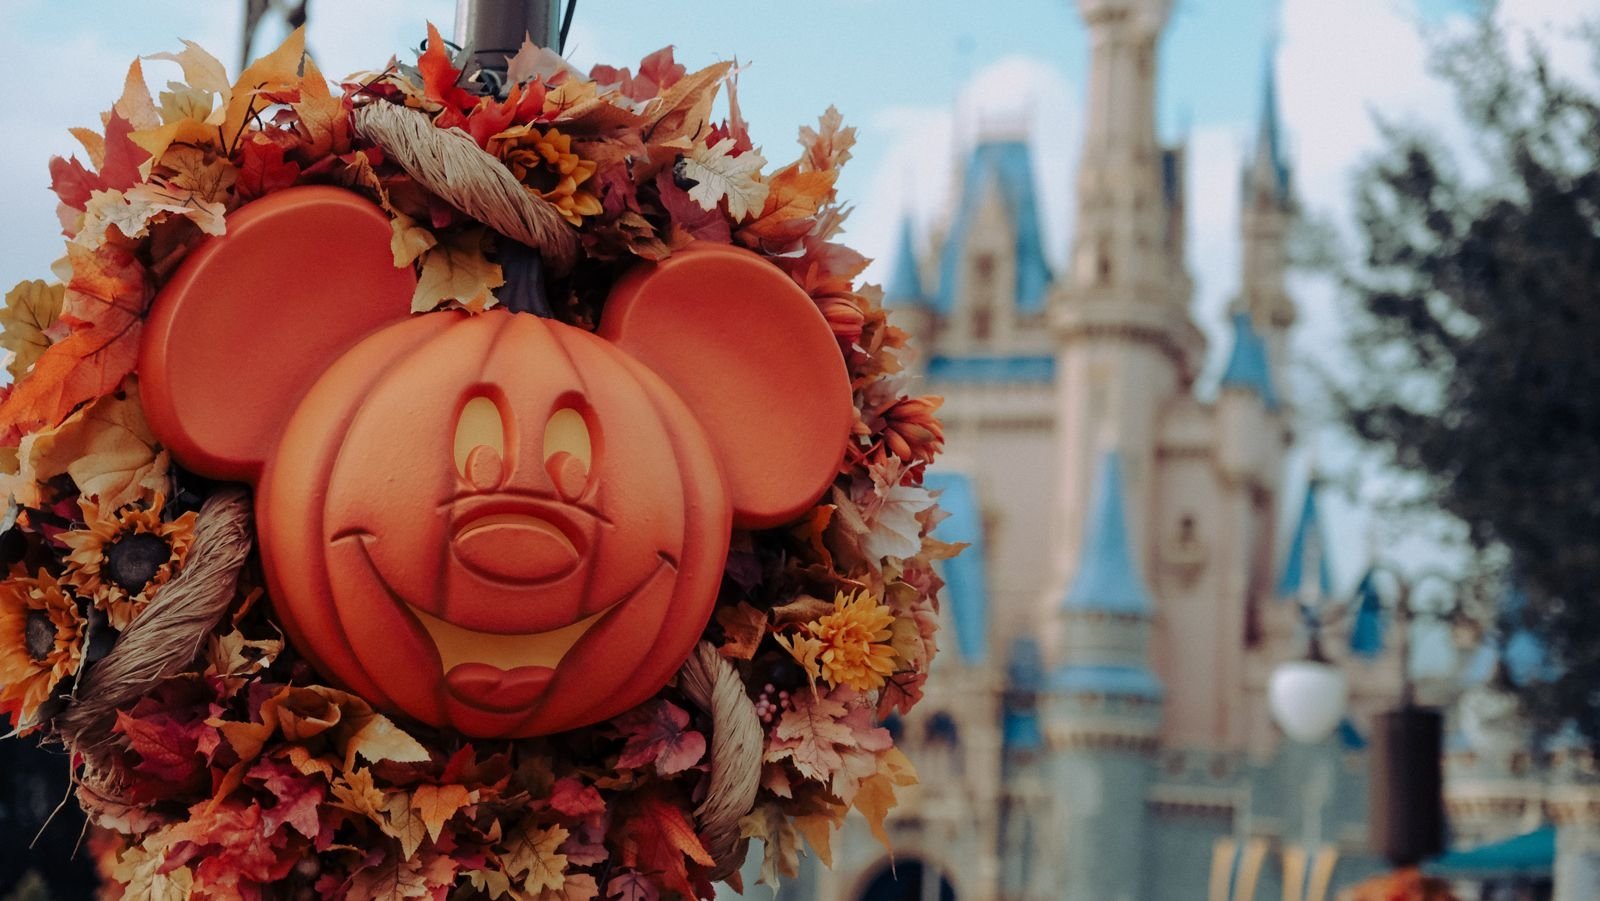 A pumpkin carved in the likeness of Mickey Mouse in front of Cinderella's Castle in Disney World 